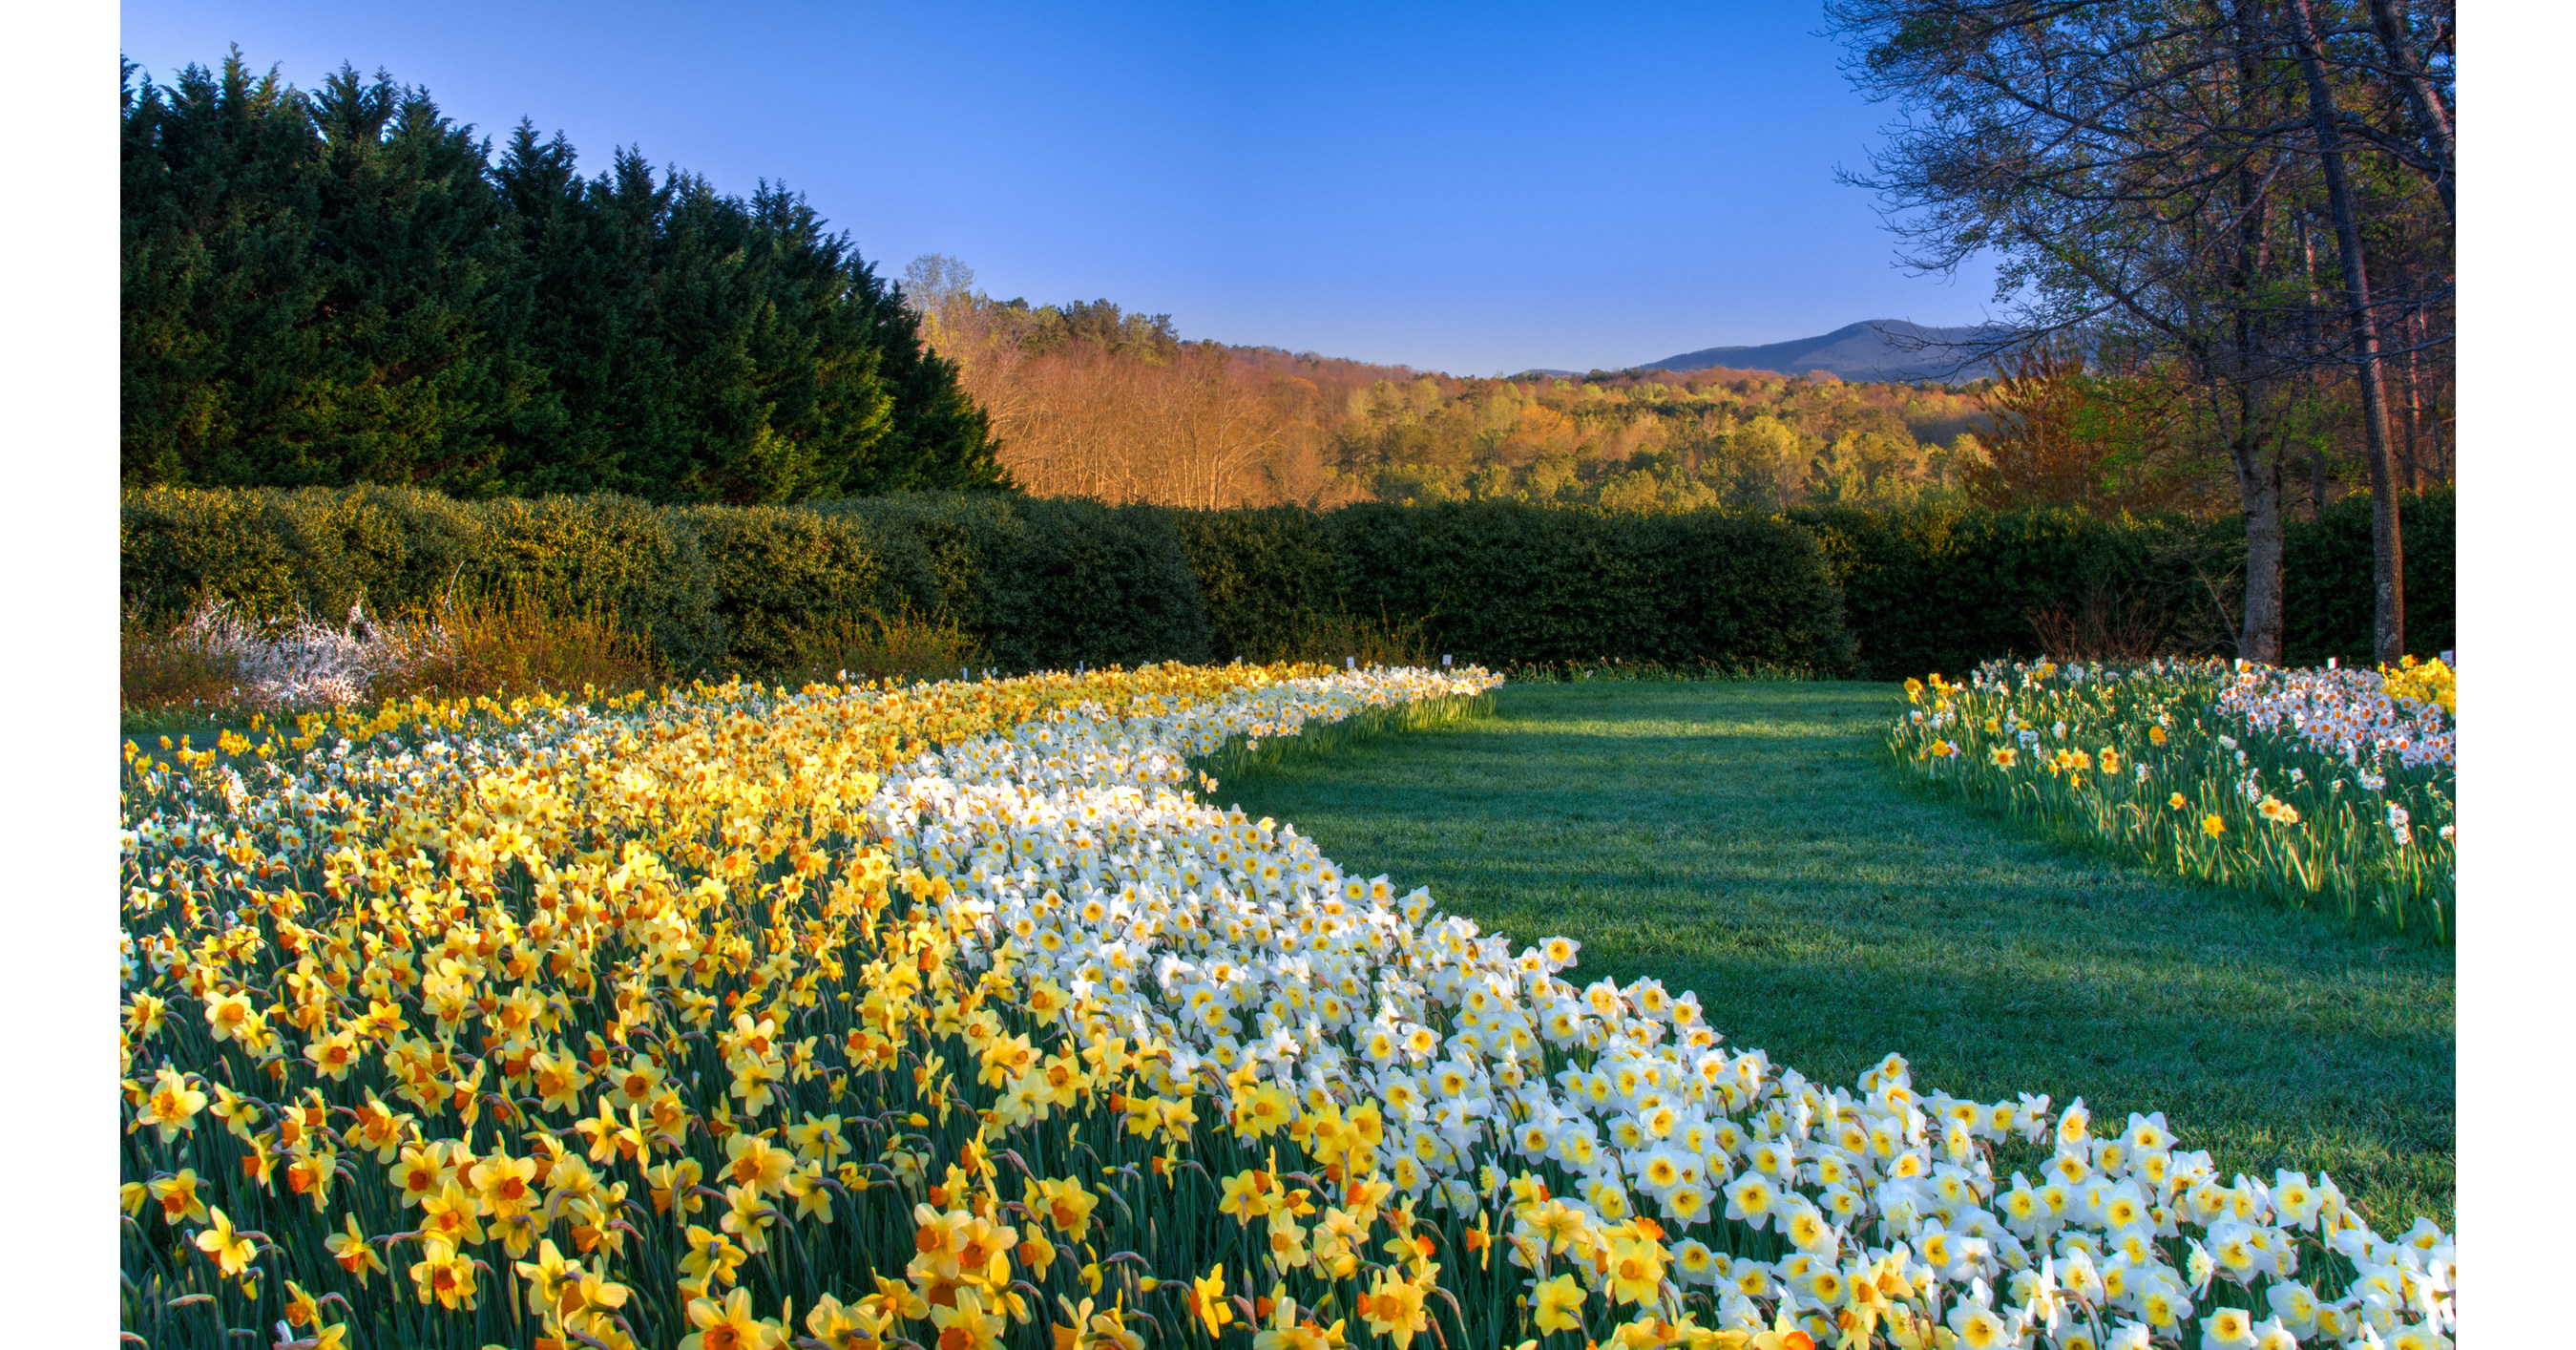 Spring starts at Gibbs Gardens with millions of daffodil blossoms